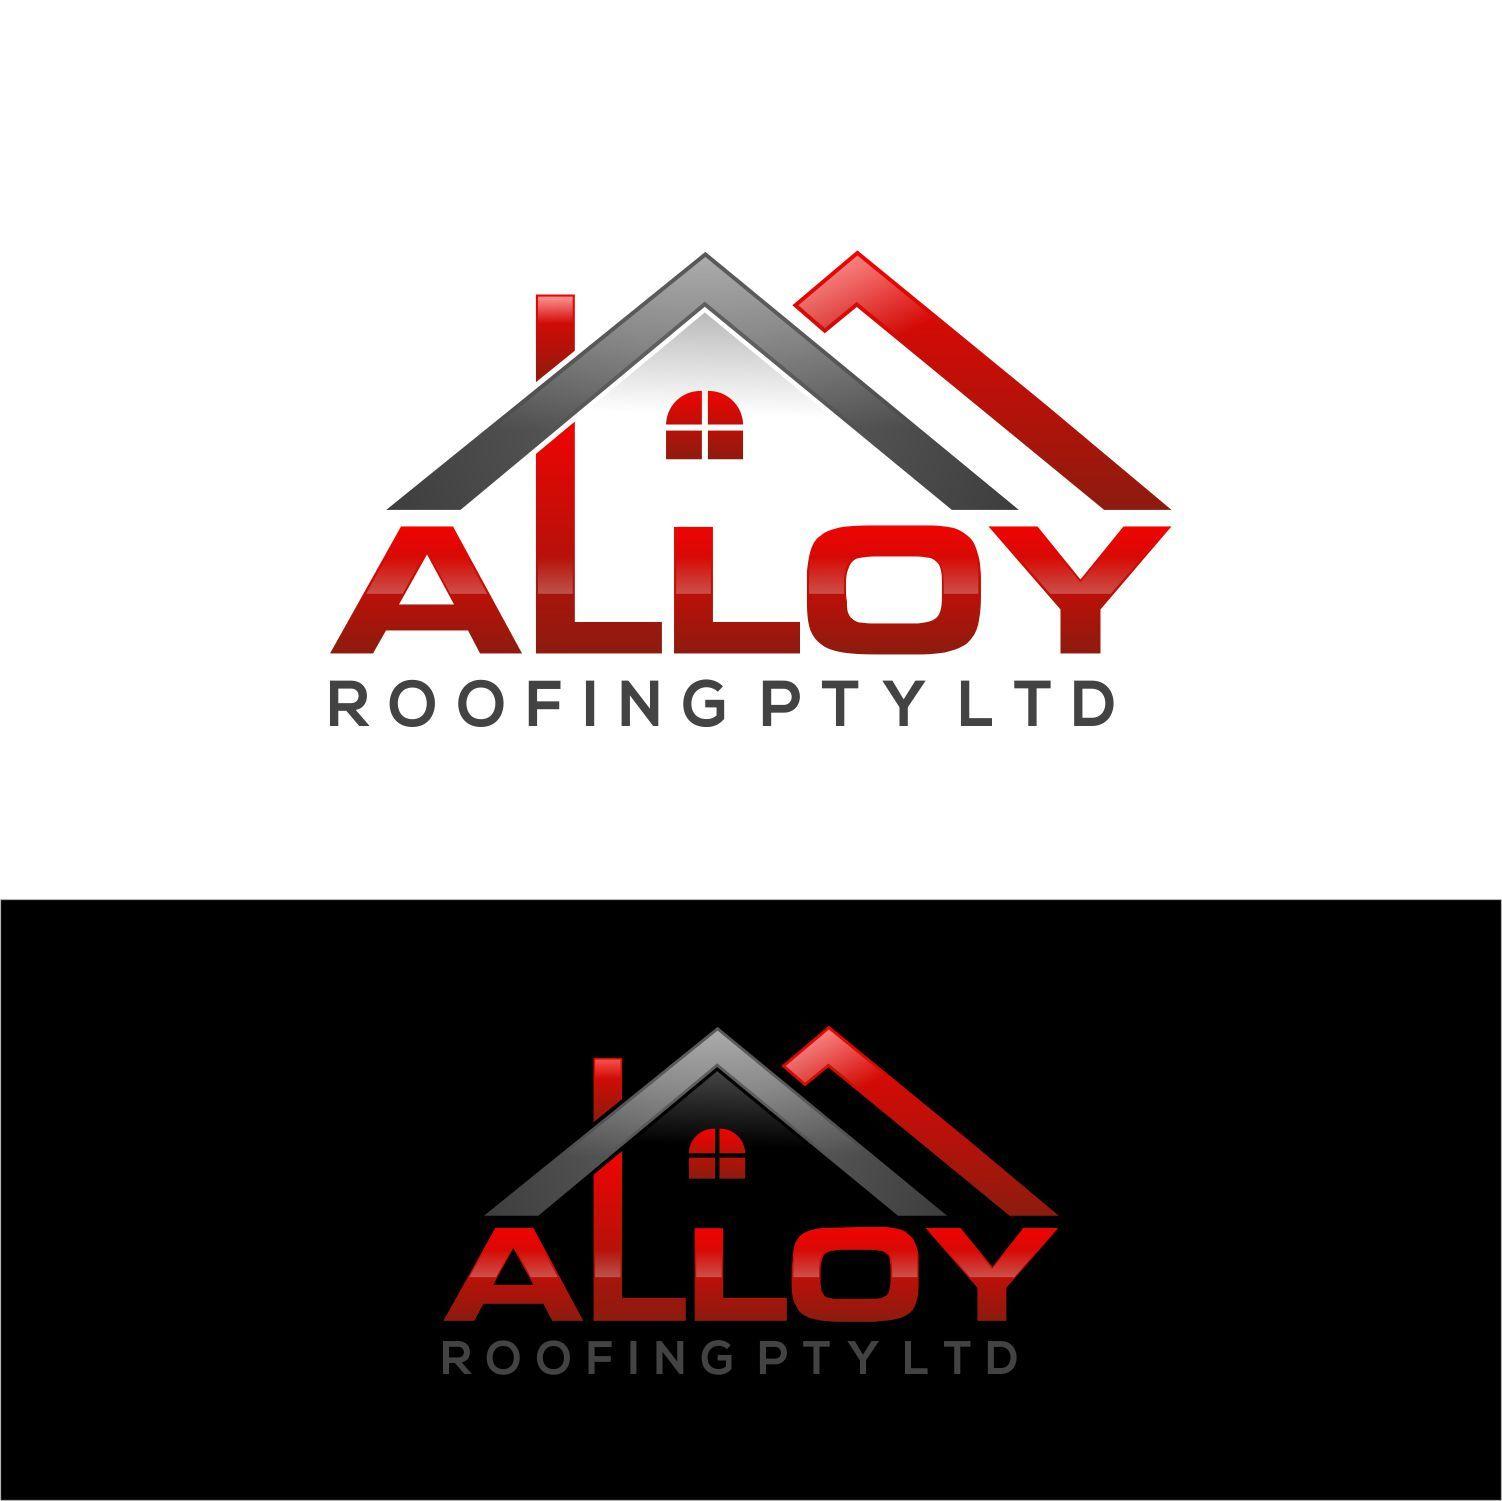 Alloy Logo - Bold, Conservative, Business Logo Design for Alloy Roofing Pty Ltd ...